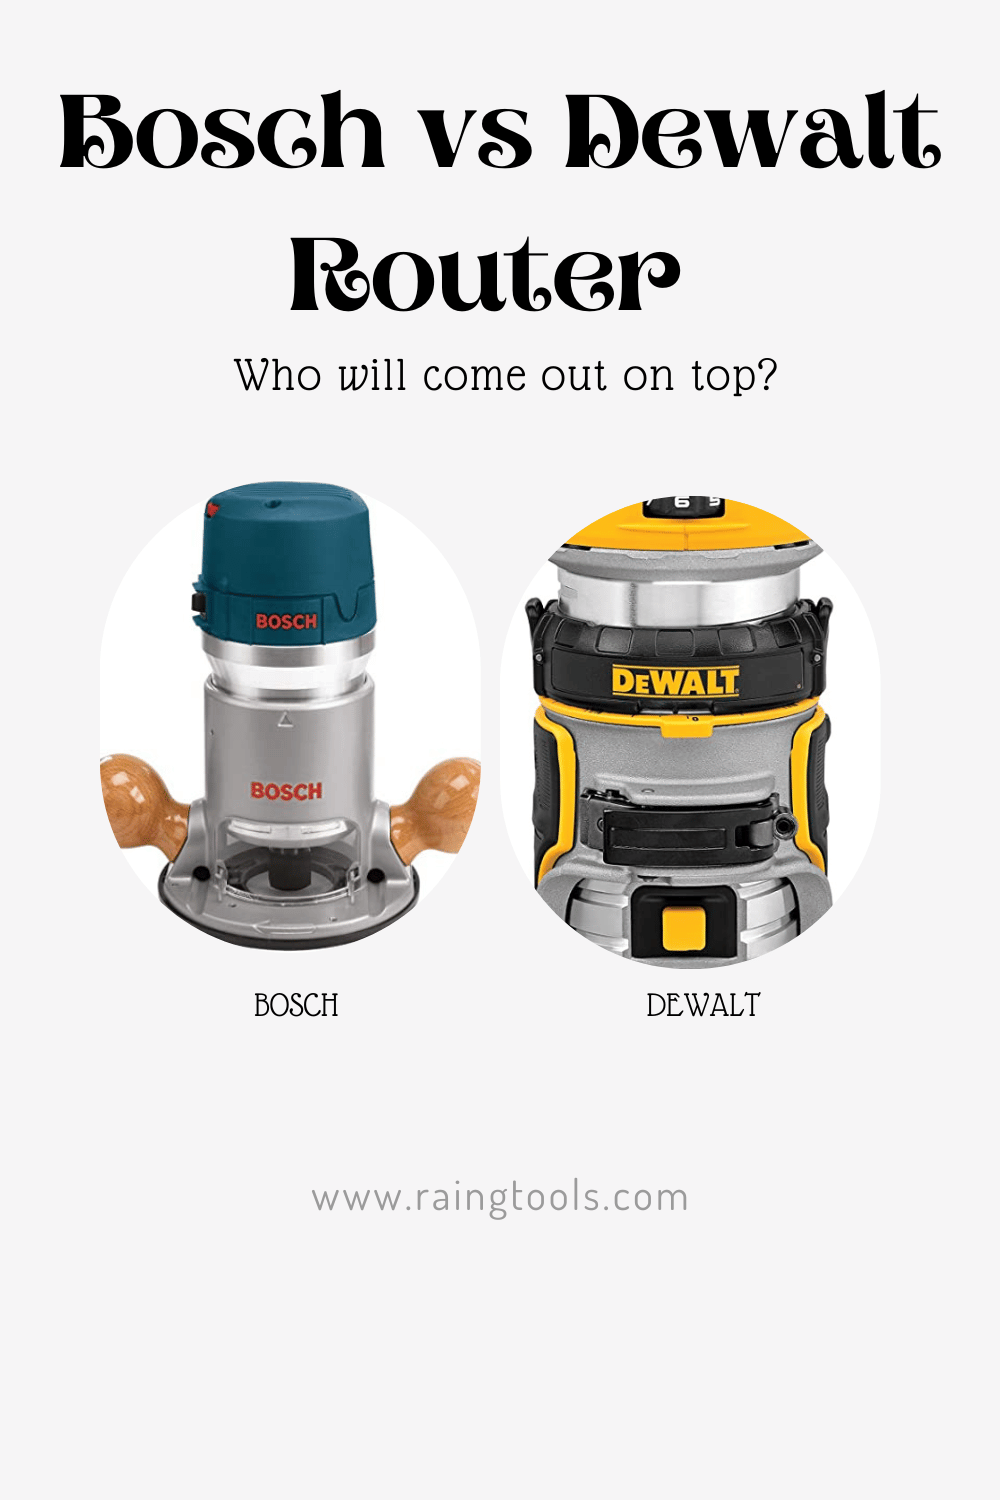 Bosch vs Dewalt Router Comparison: Who will come out on top?